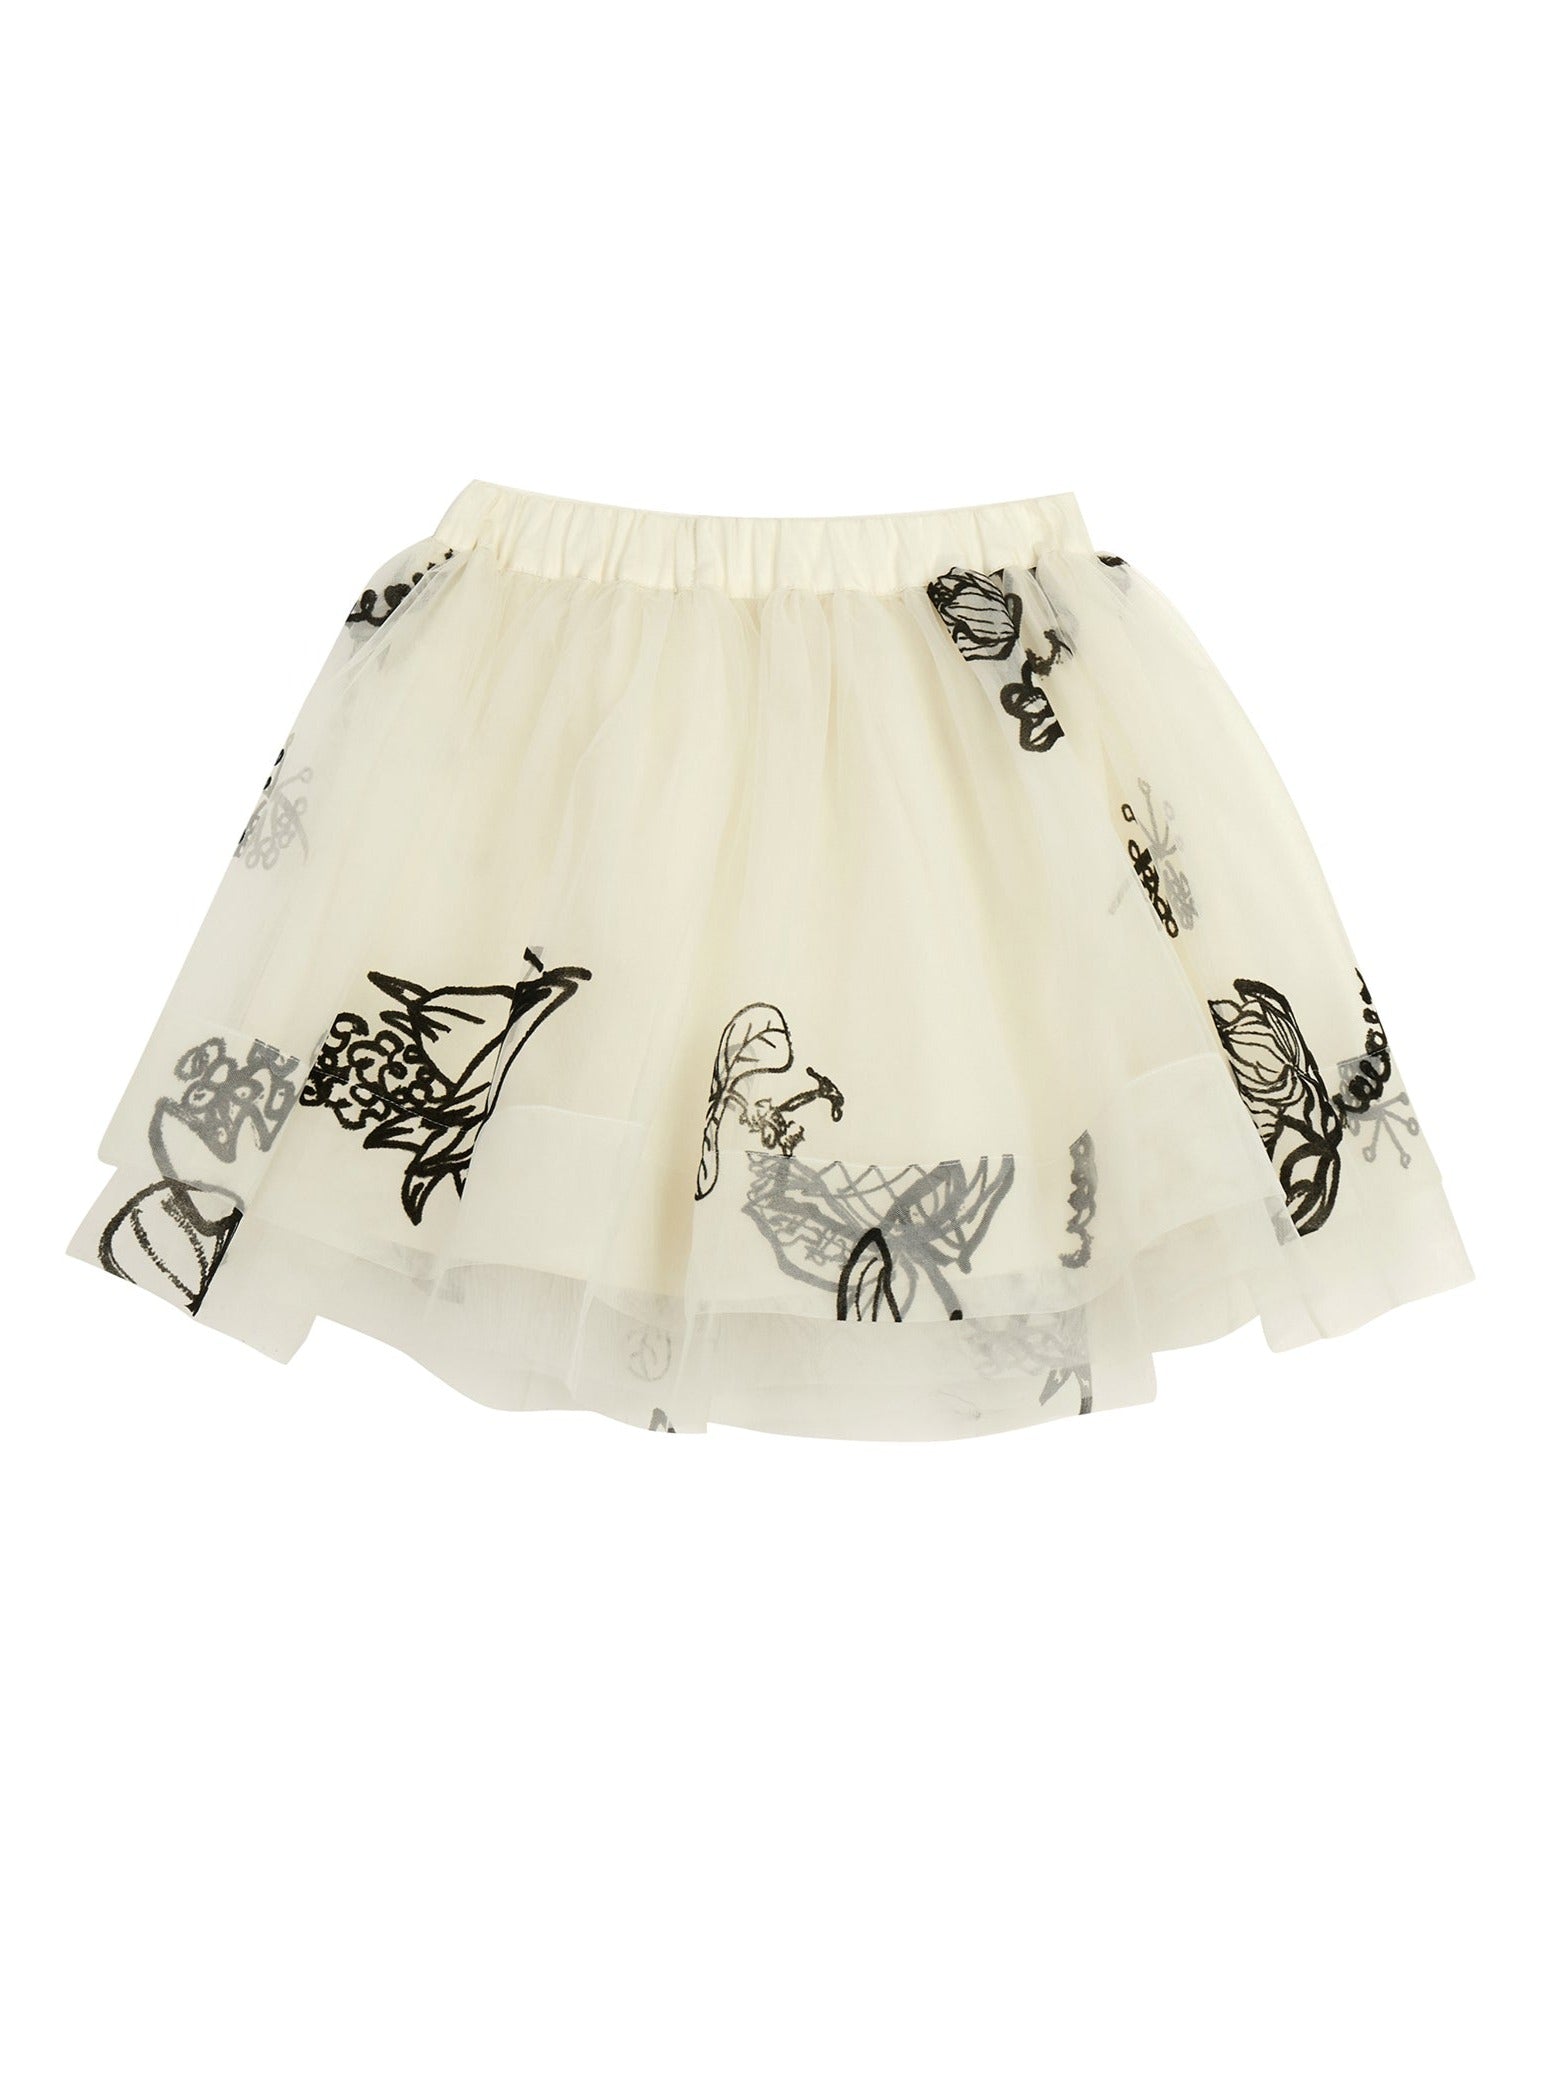 Cream Tulle skirt with Black applique. above knees, elasticated waist, for girls sizes 4-8 years old. brand fits large.